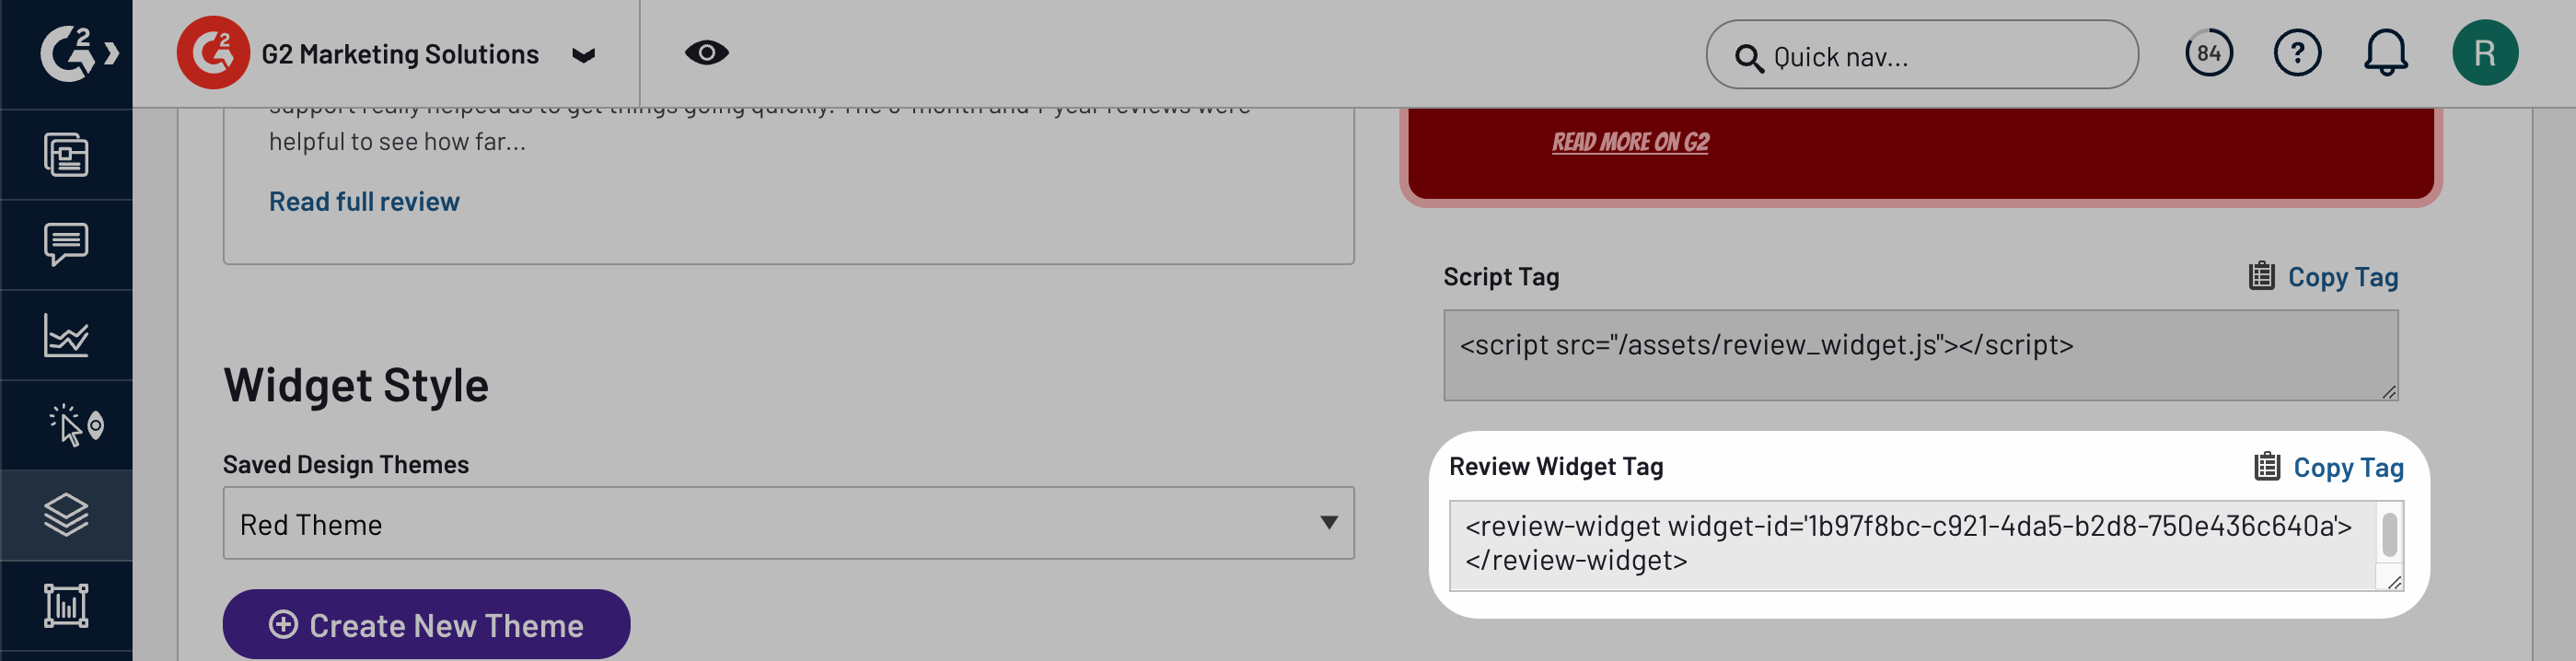 image showing review widget tag